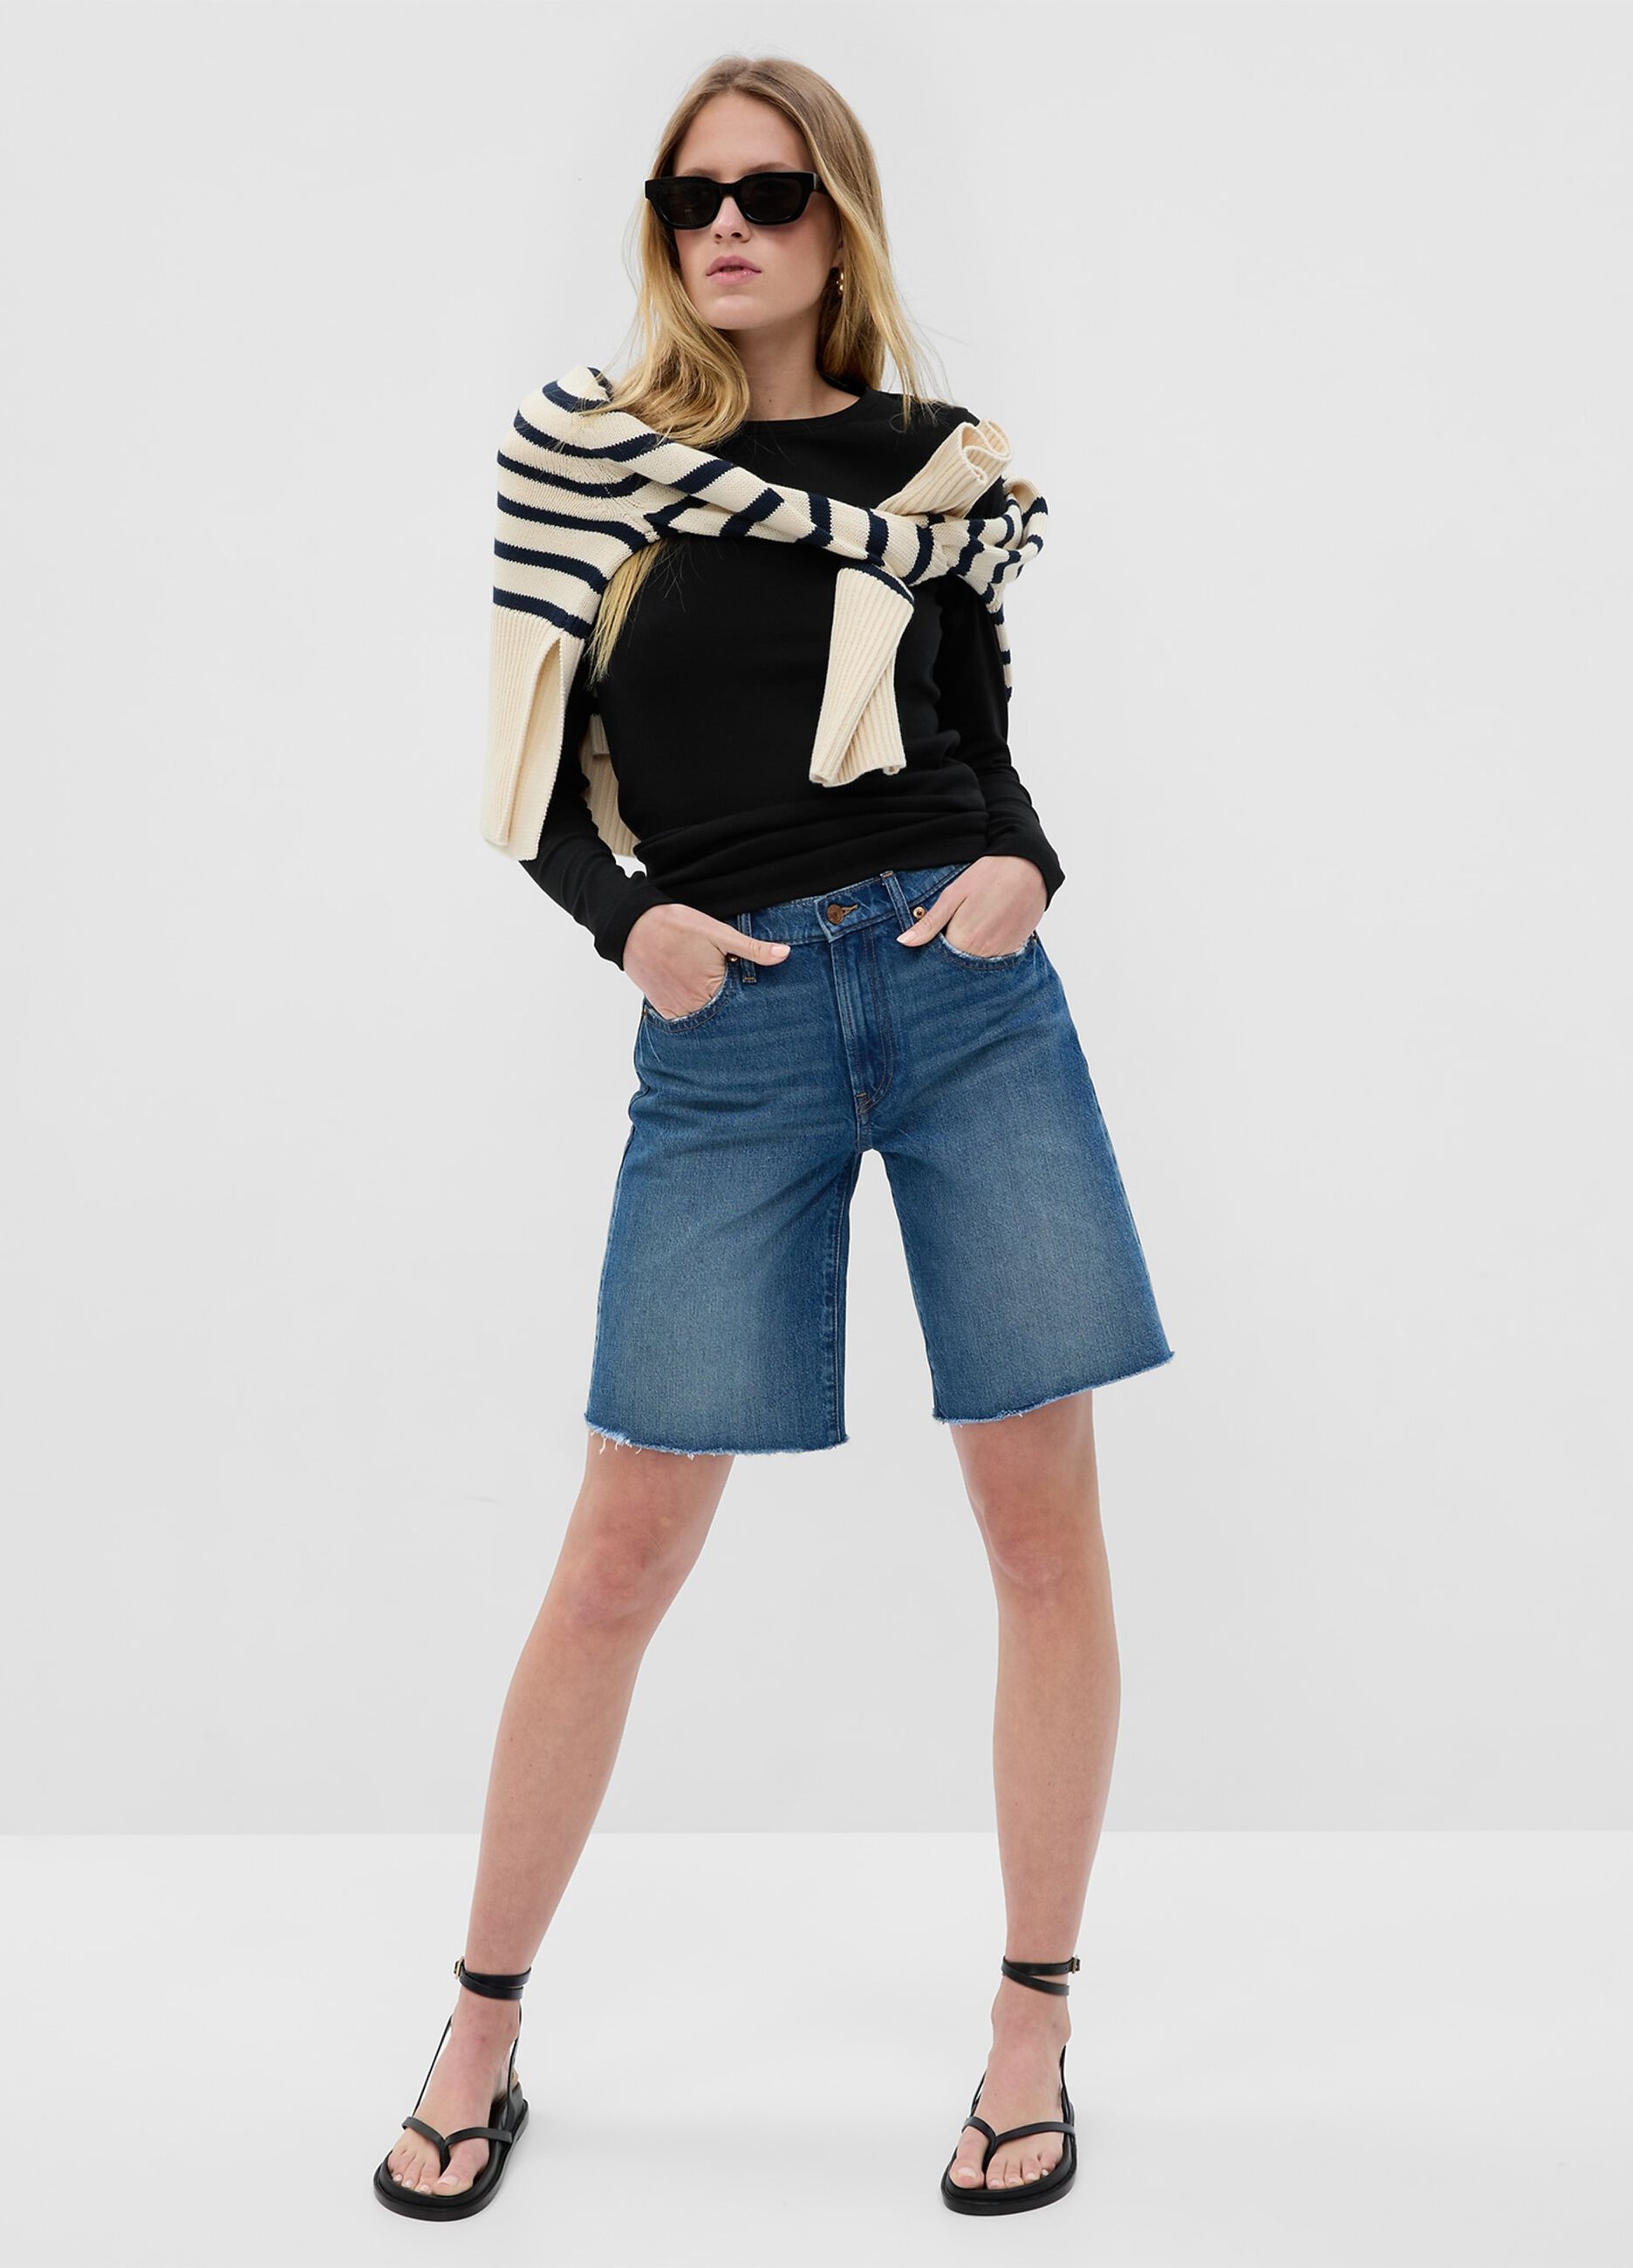 Long-sleeved T-shirt in cotton and modal_0